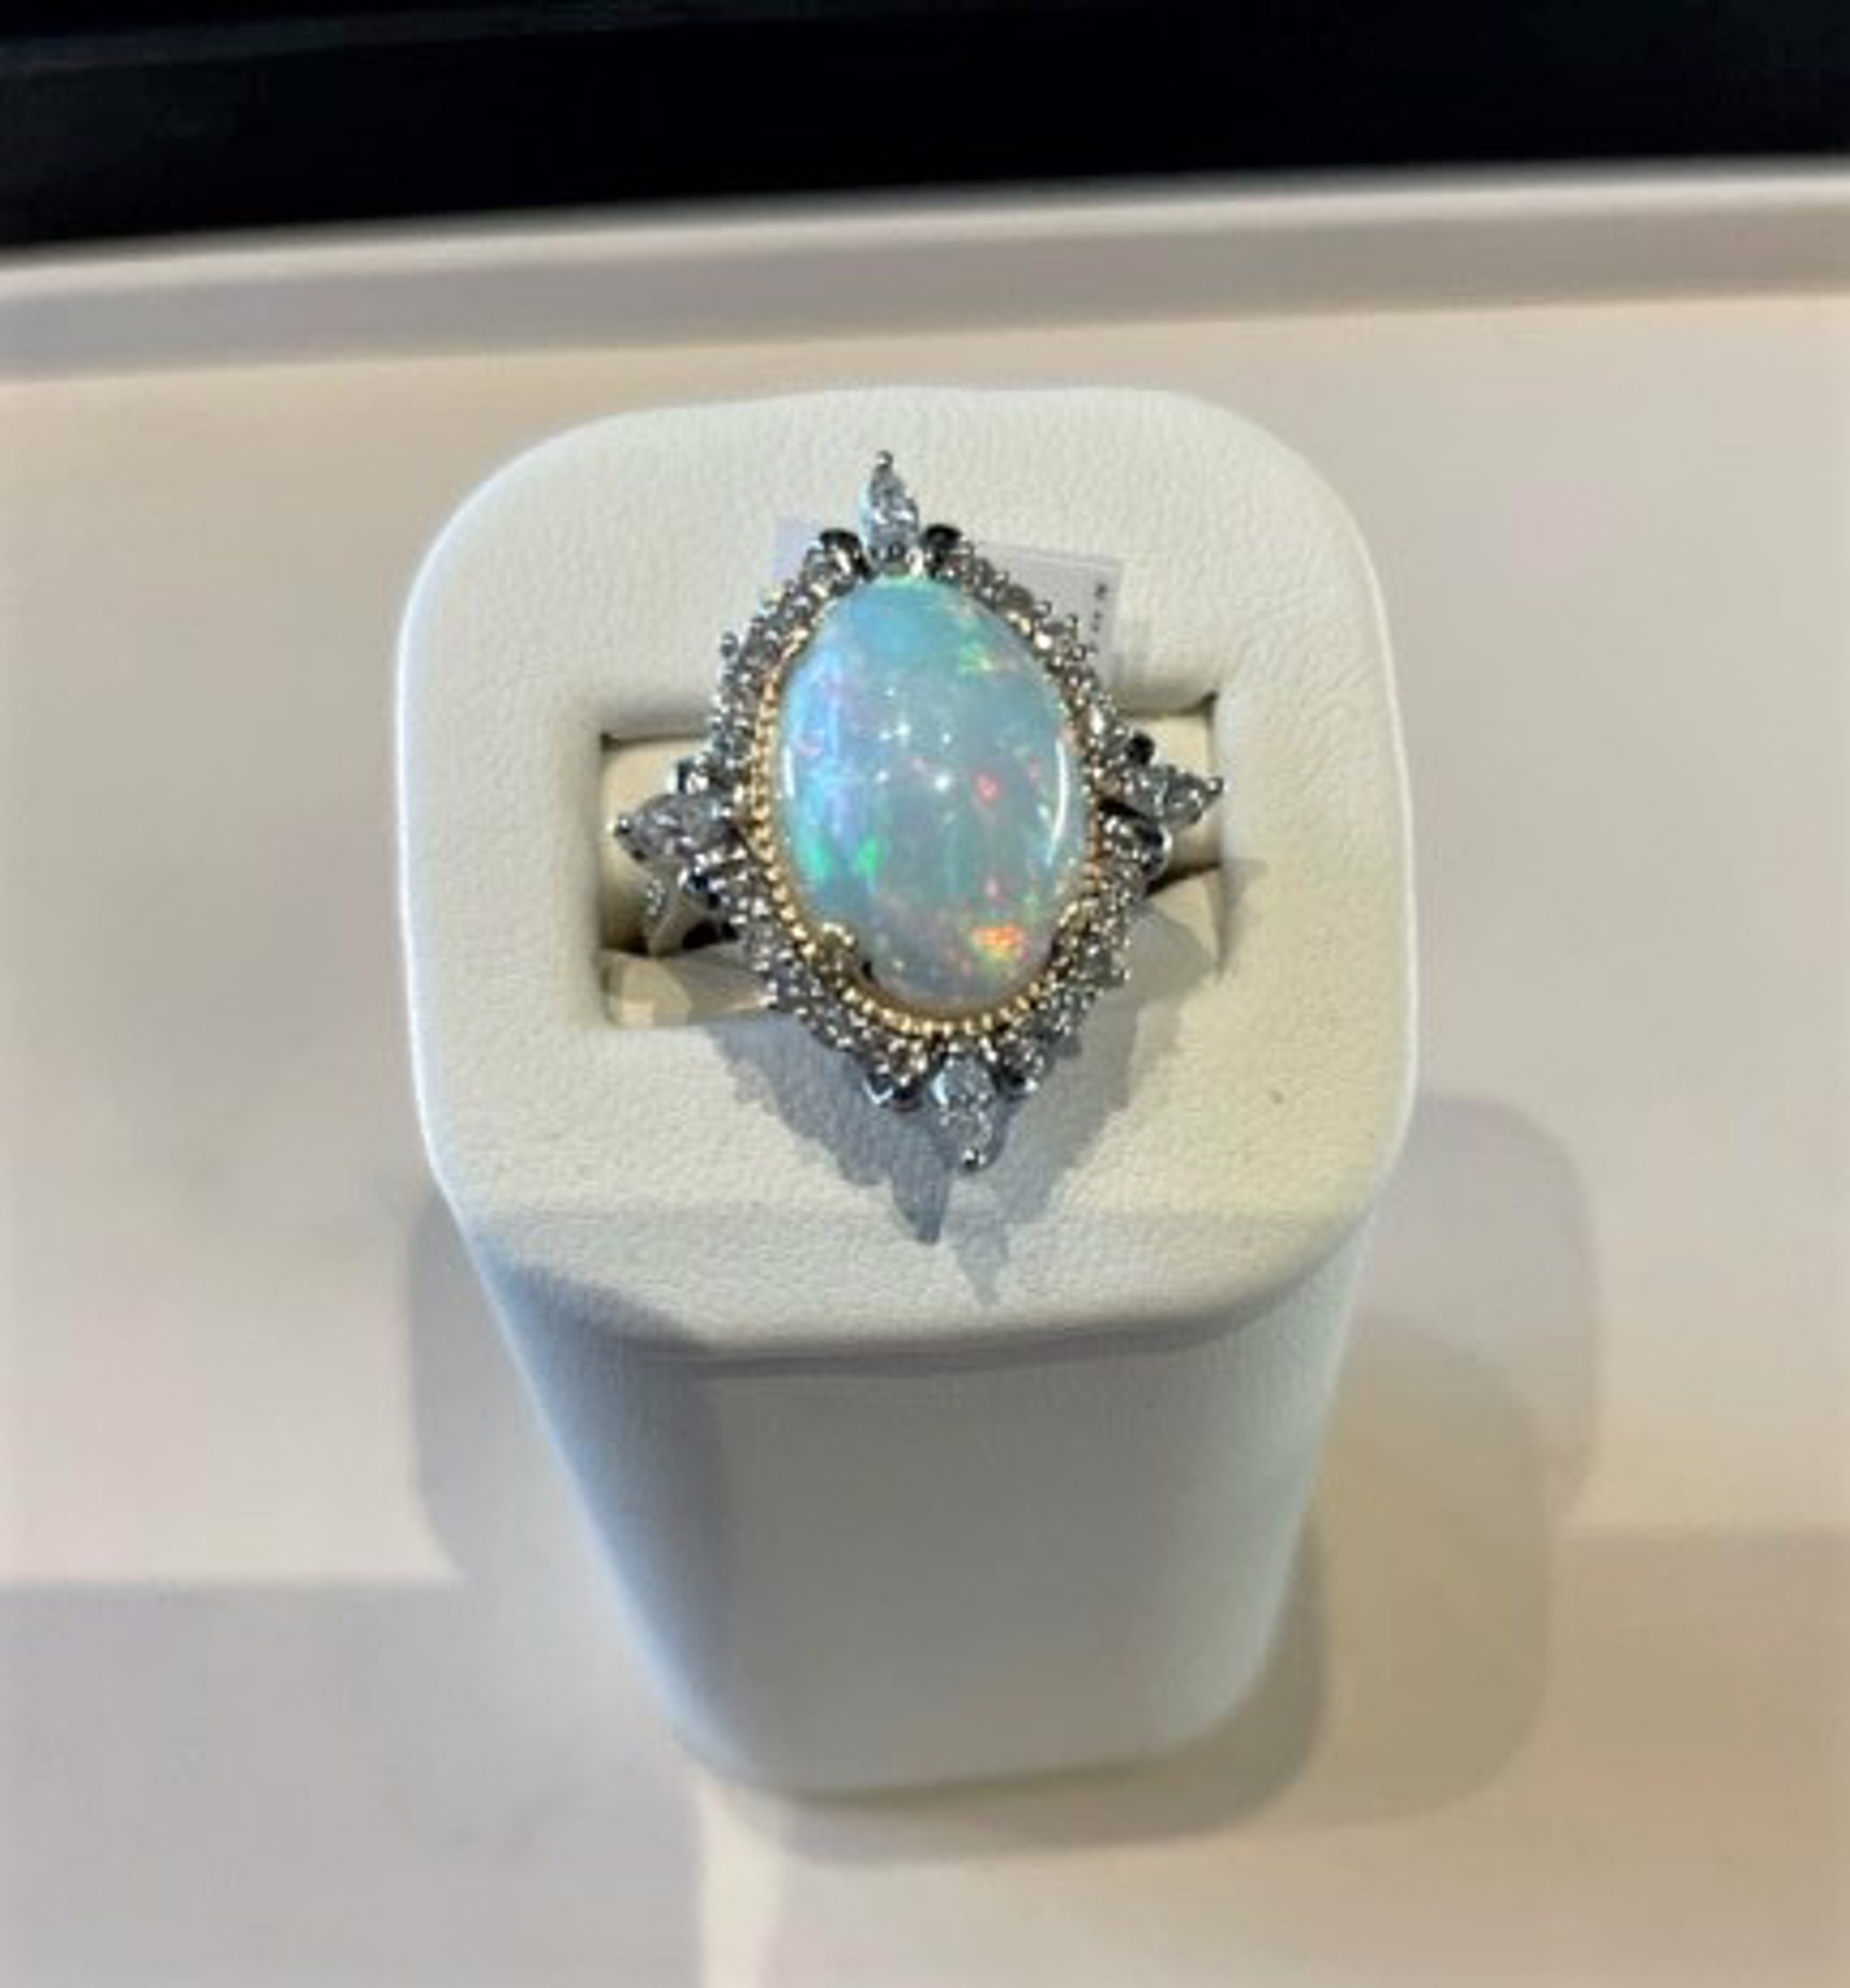 Oval Ethiopian Opal surrounded by diamonds in 18k white gold by Melinda Lawton Jewelry